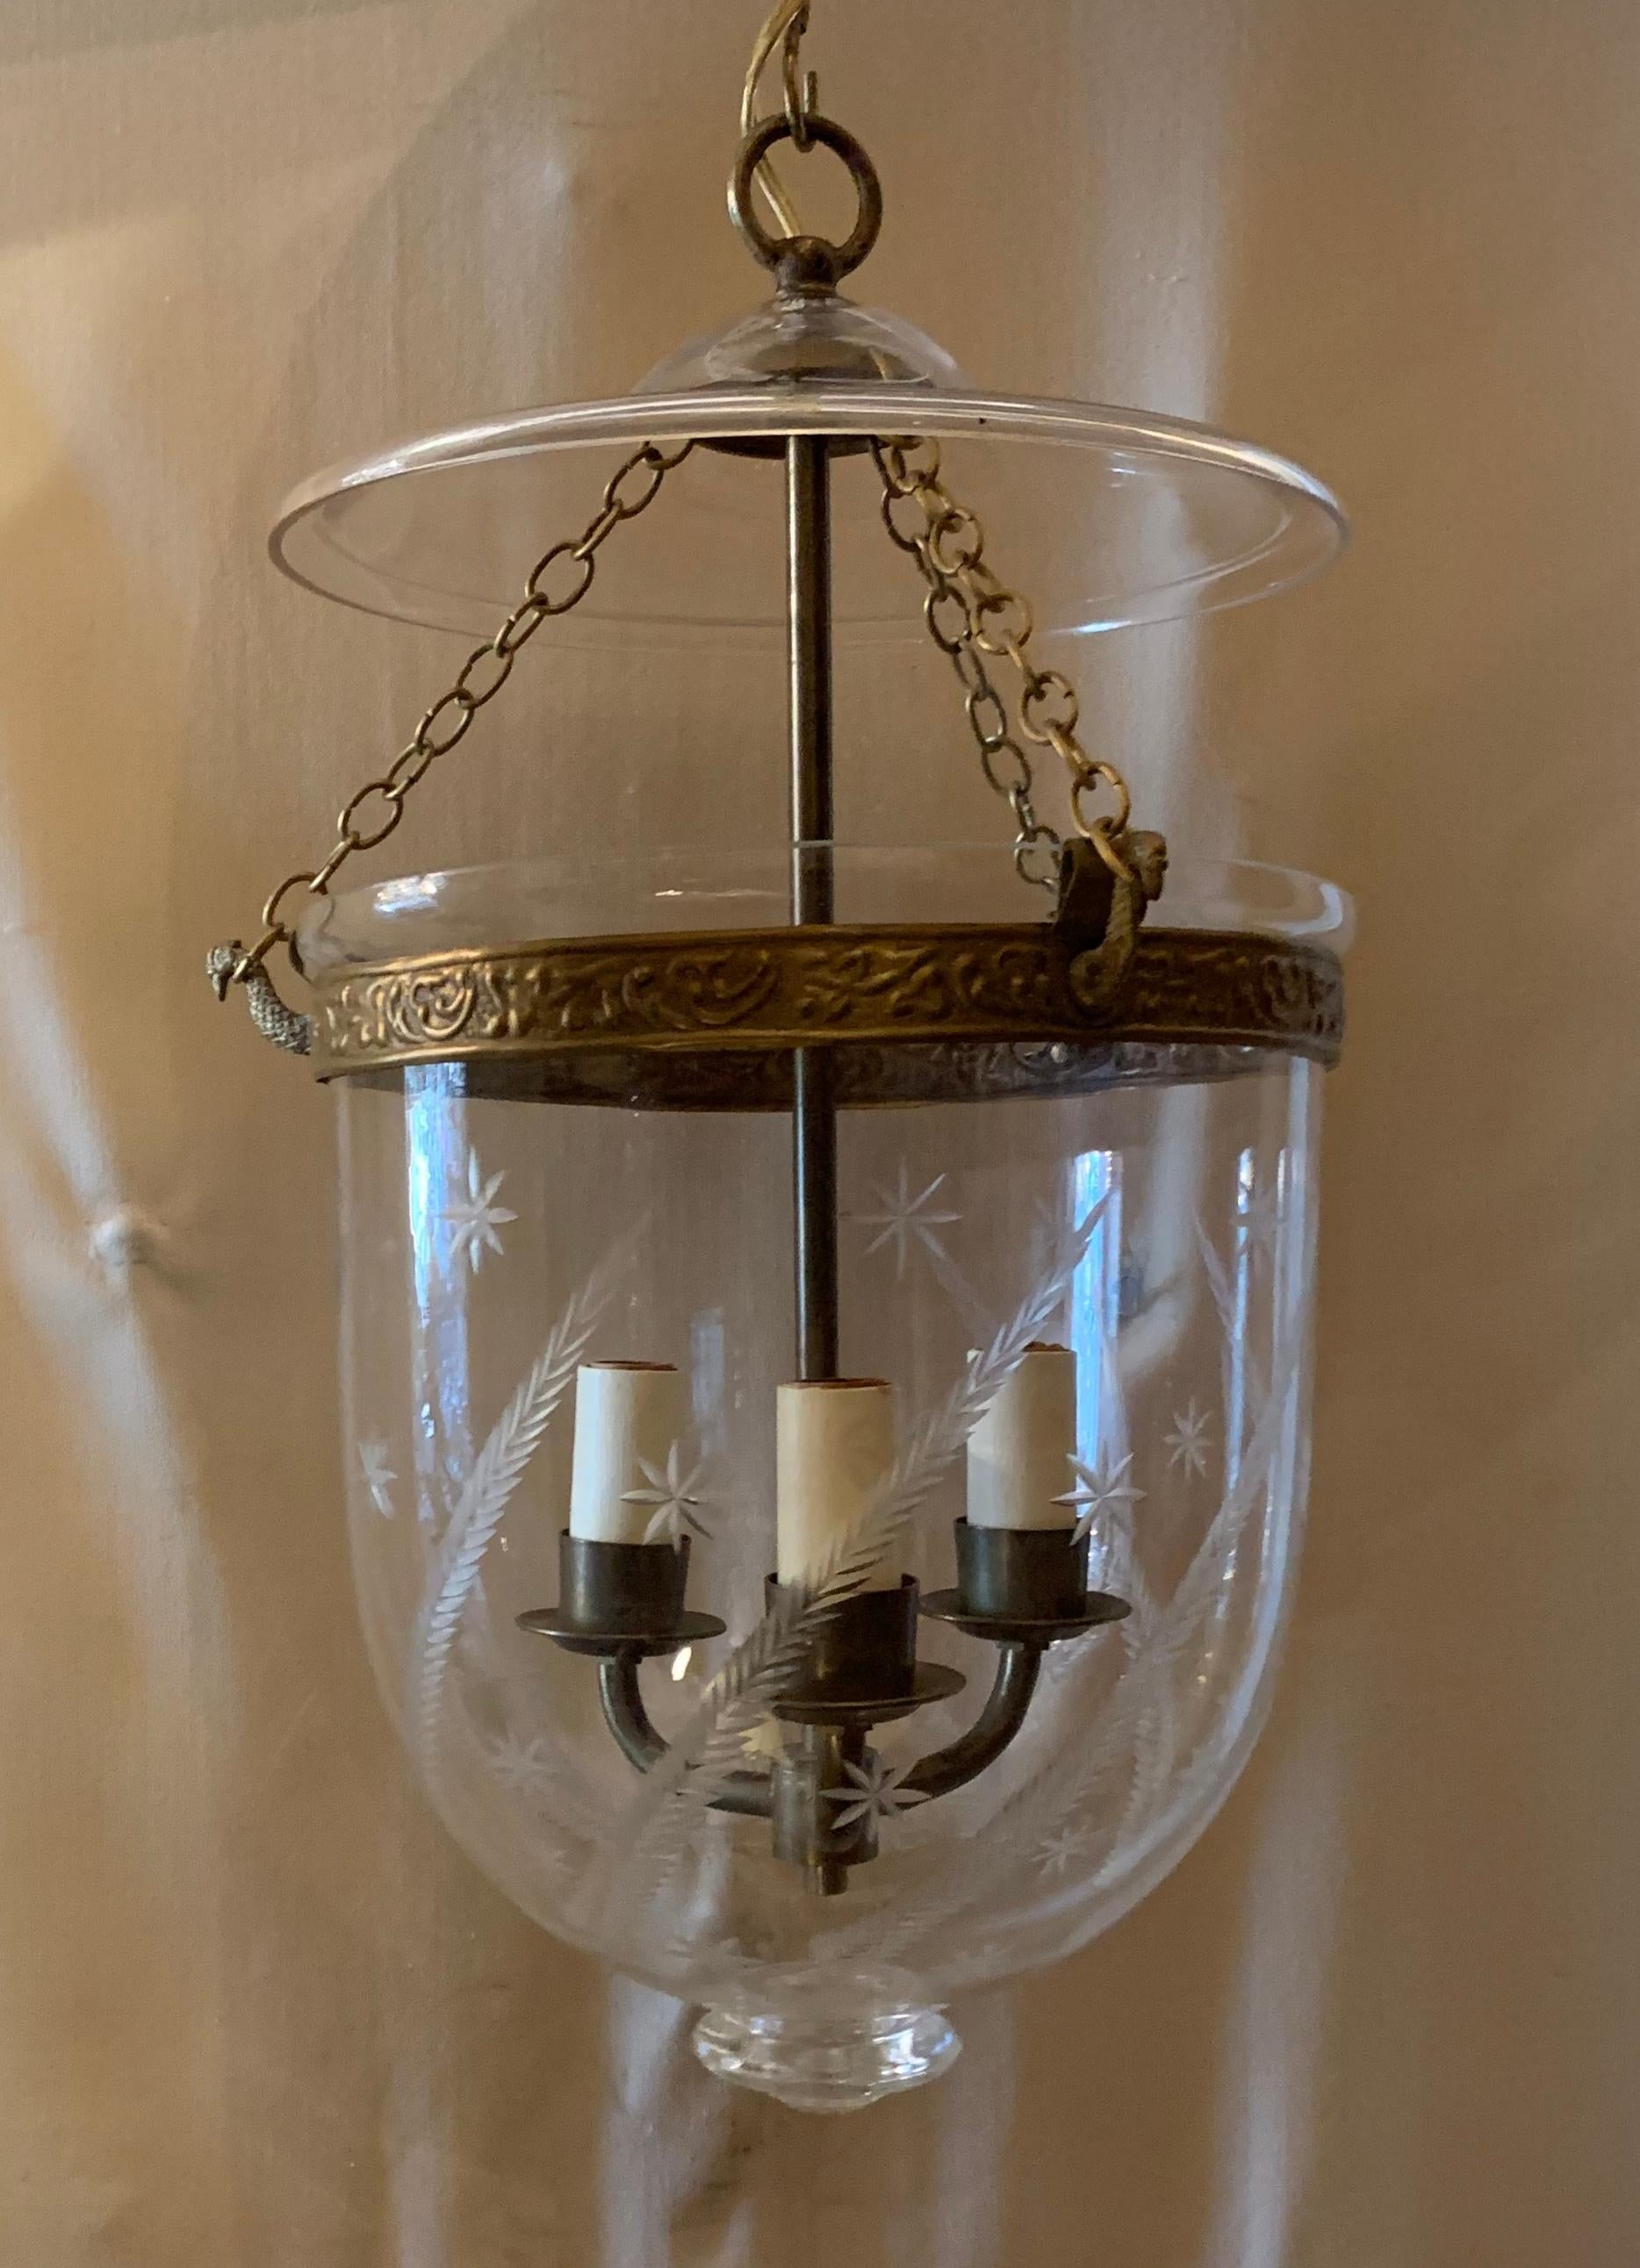 A wonderful English etched star and wheat blown glass bell jar lantern pendant fixture with brass hardware that has 3 candelabra lights and has been rewired and comes with chain canopy and mounting hardware for installation.